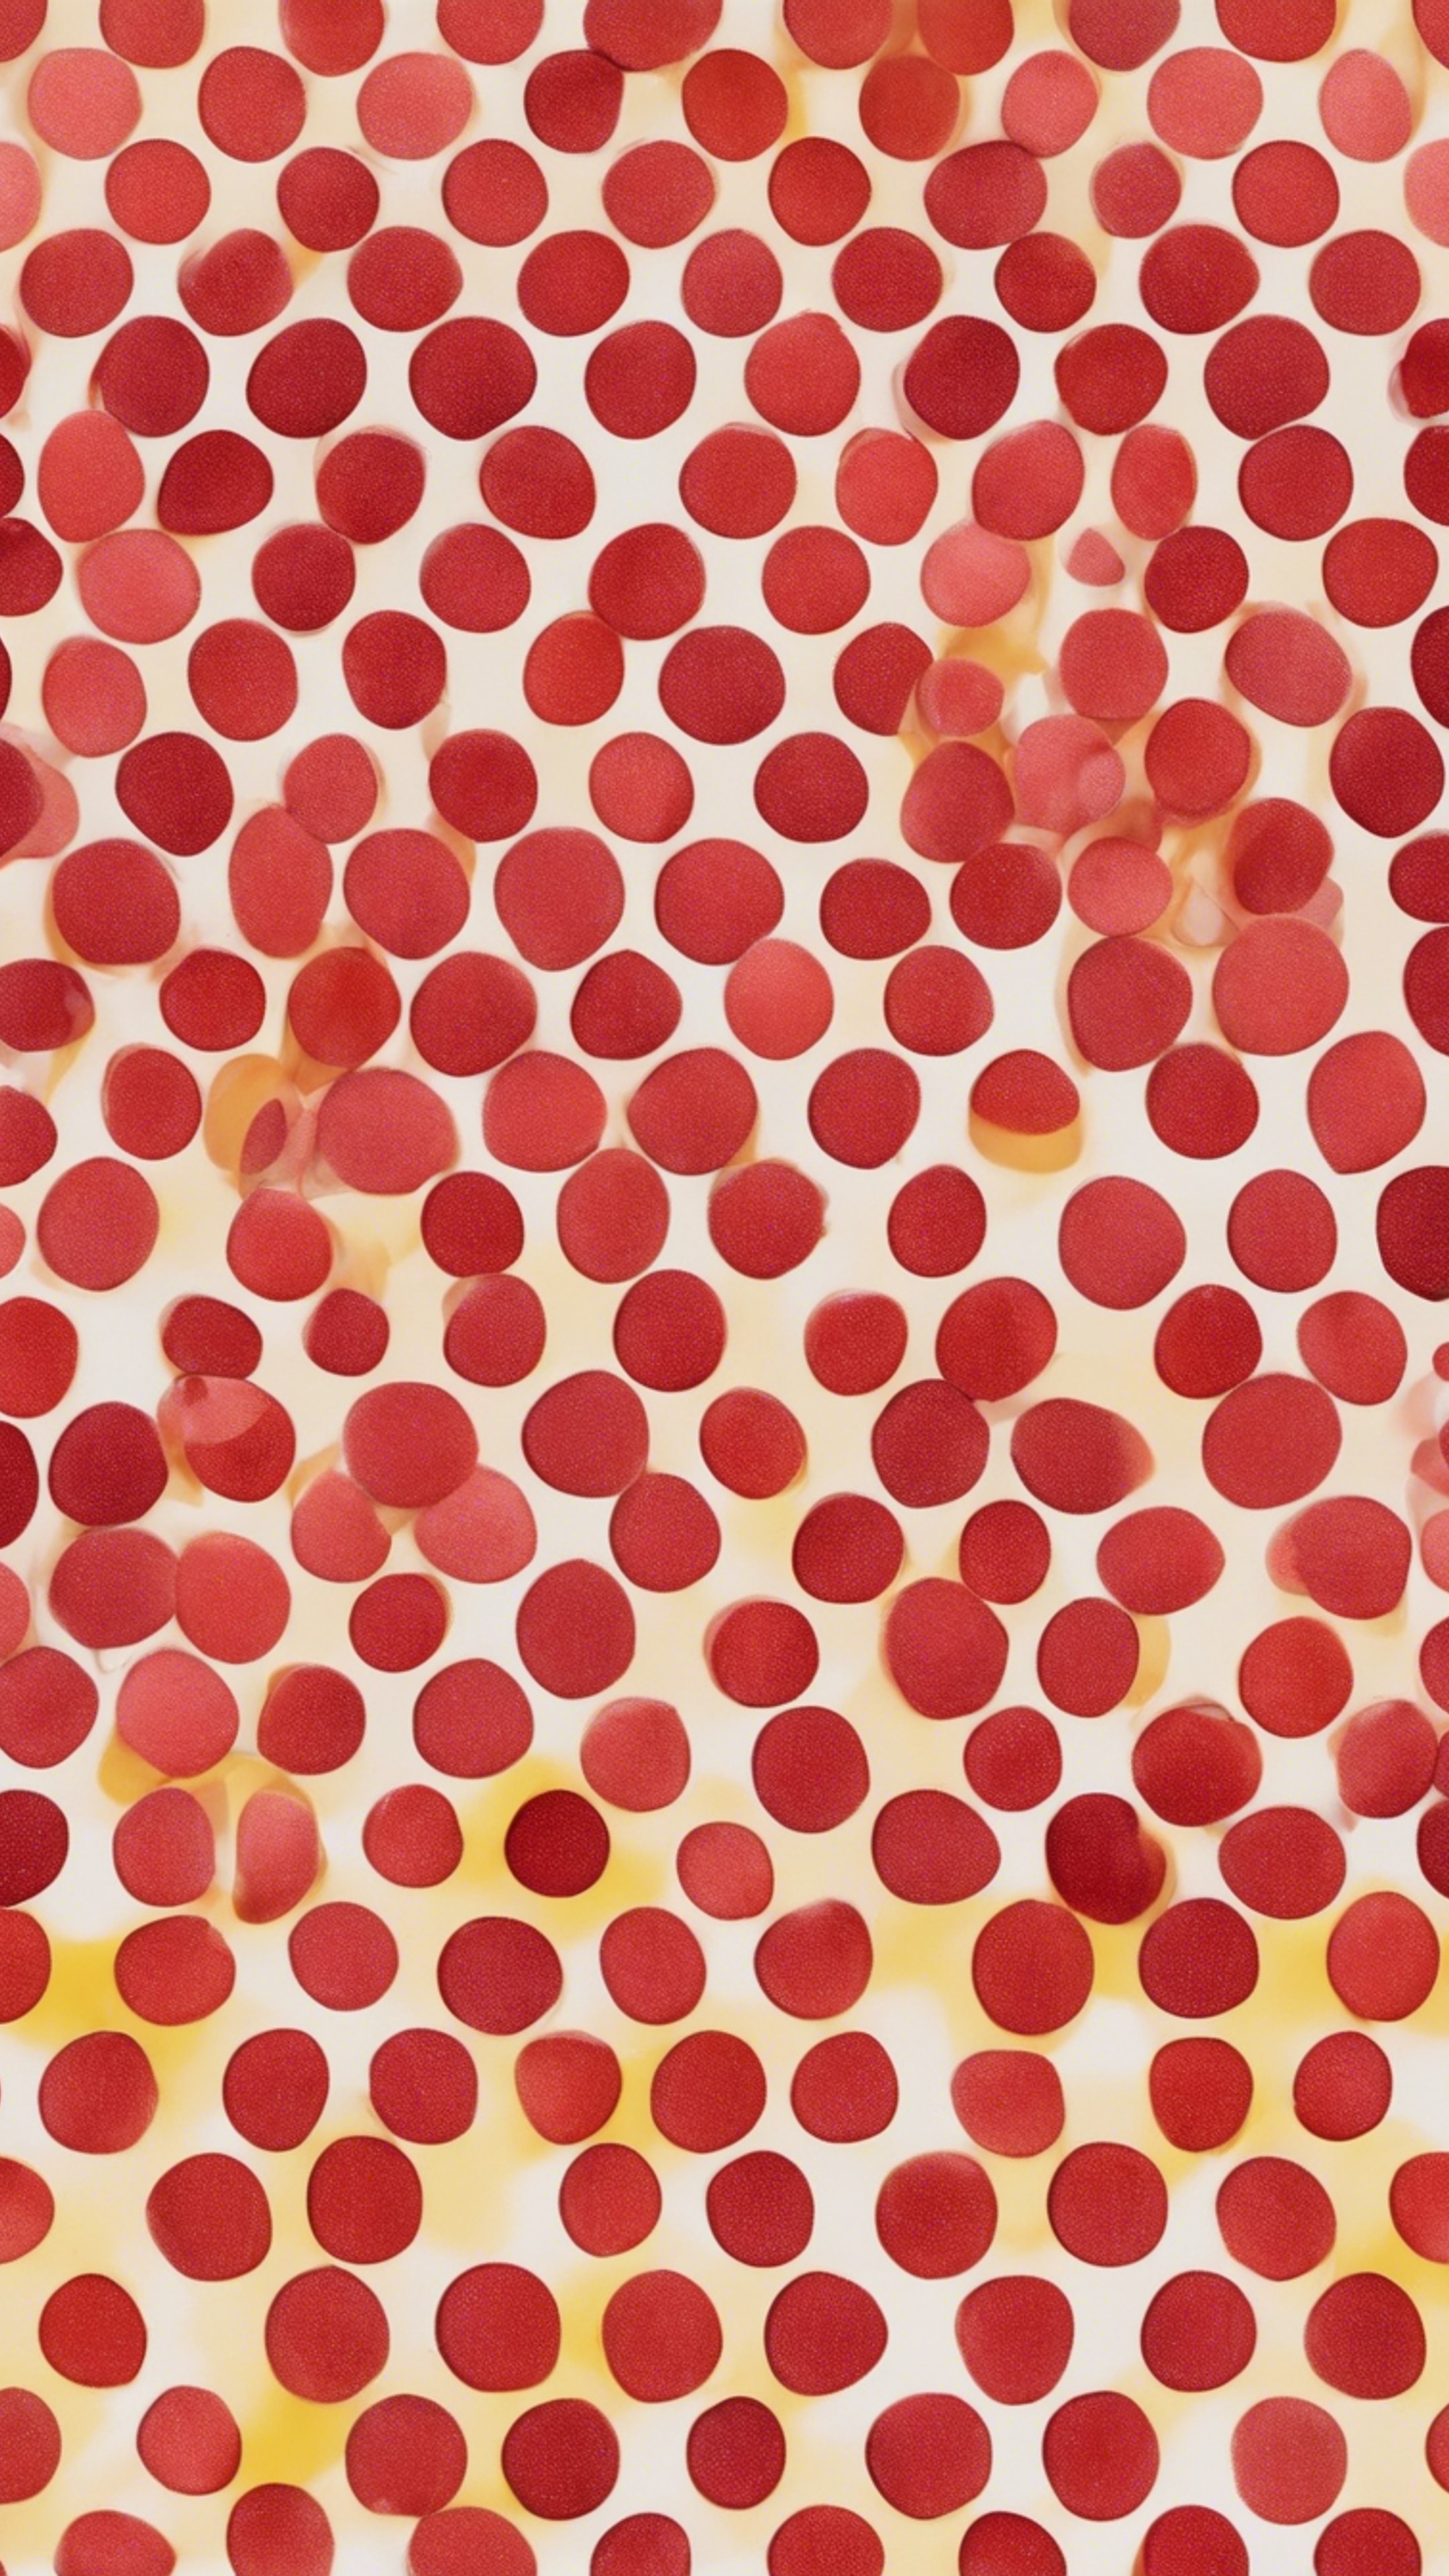 Red polka dots clashing beautifully with yellow ones, all over the seamless canvas. Tapeet[6845ea3f5aaf42daa07d]